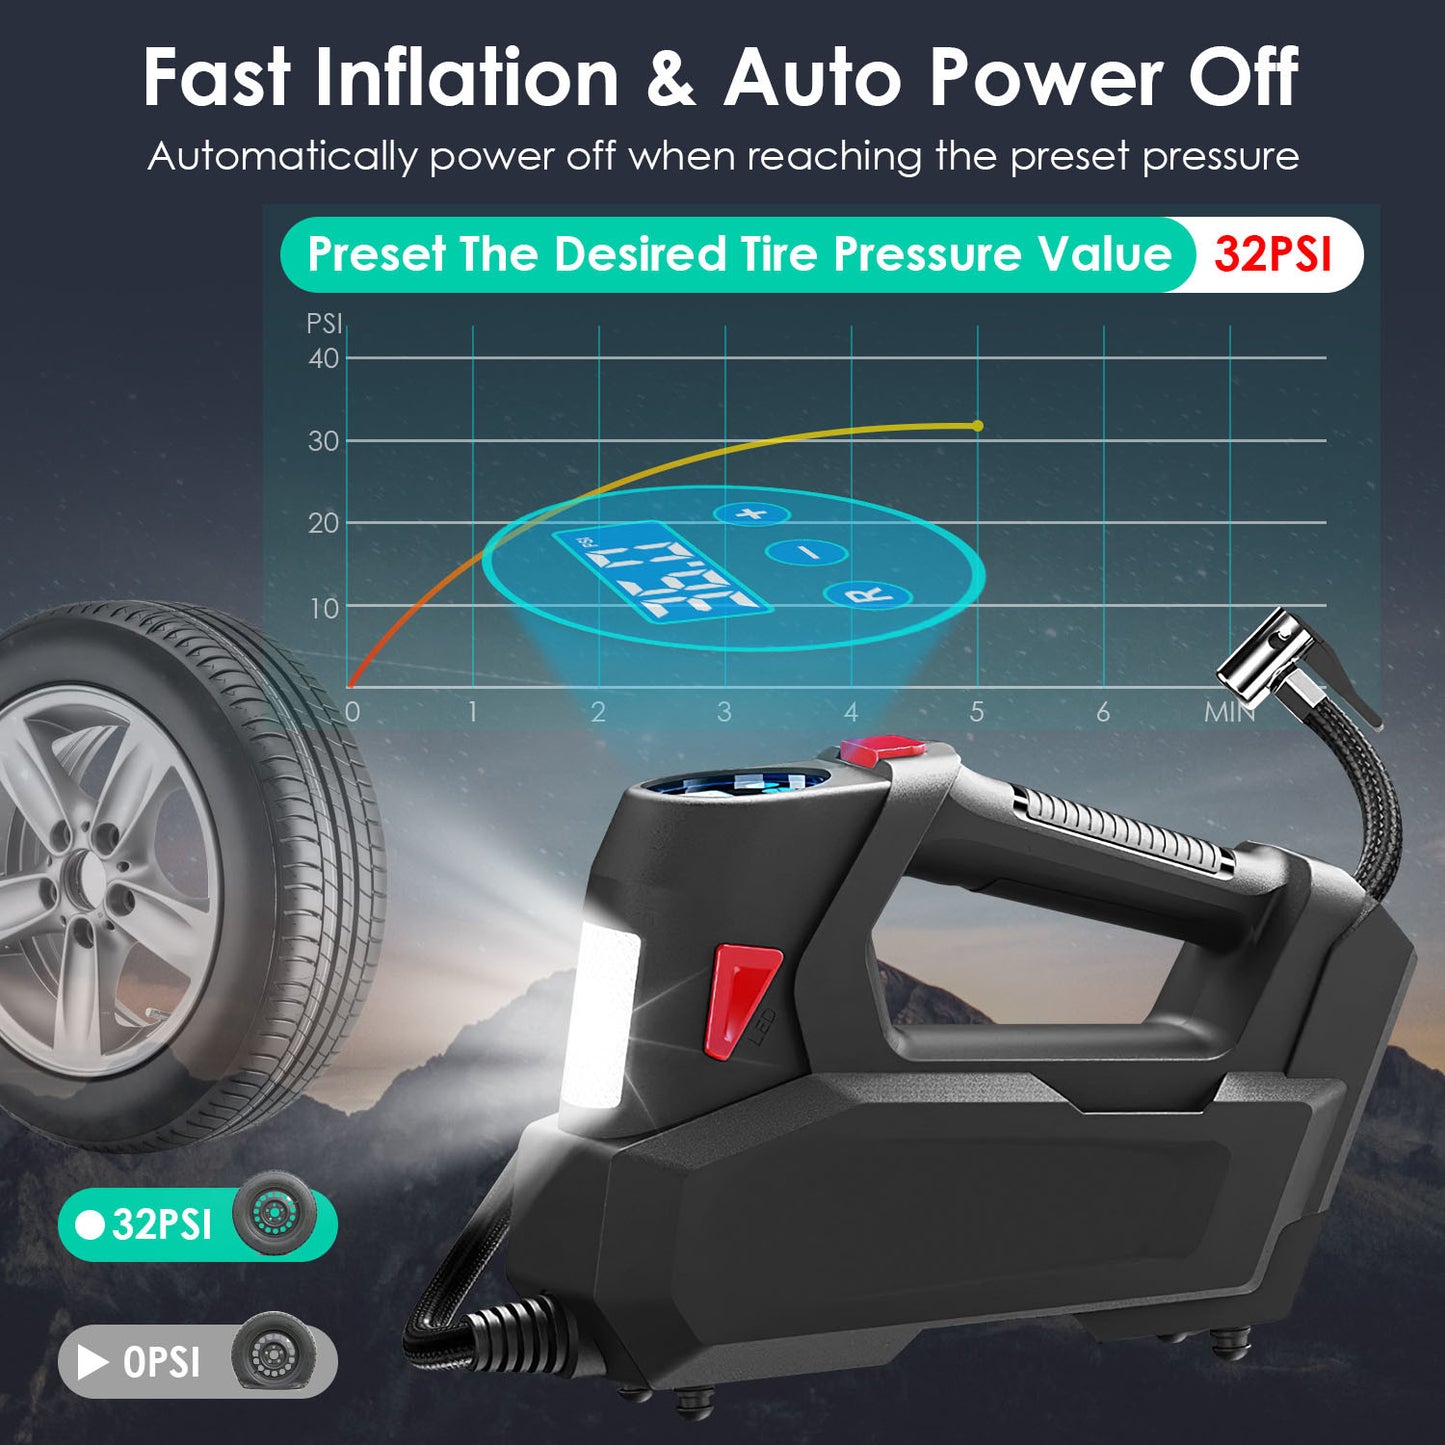 Portable Tire Inflator 120 PSI Maximum 90W Powered Tire Pump with Digital Display LED Light Inflatable Nozzle Needle Fuse Air Compressor for Bikes Motorbikes Car Balls